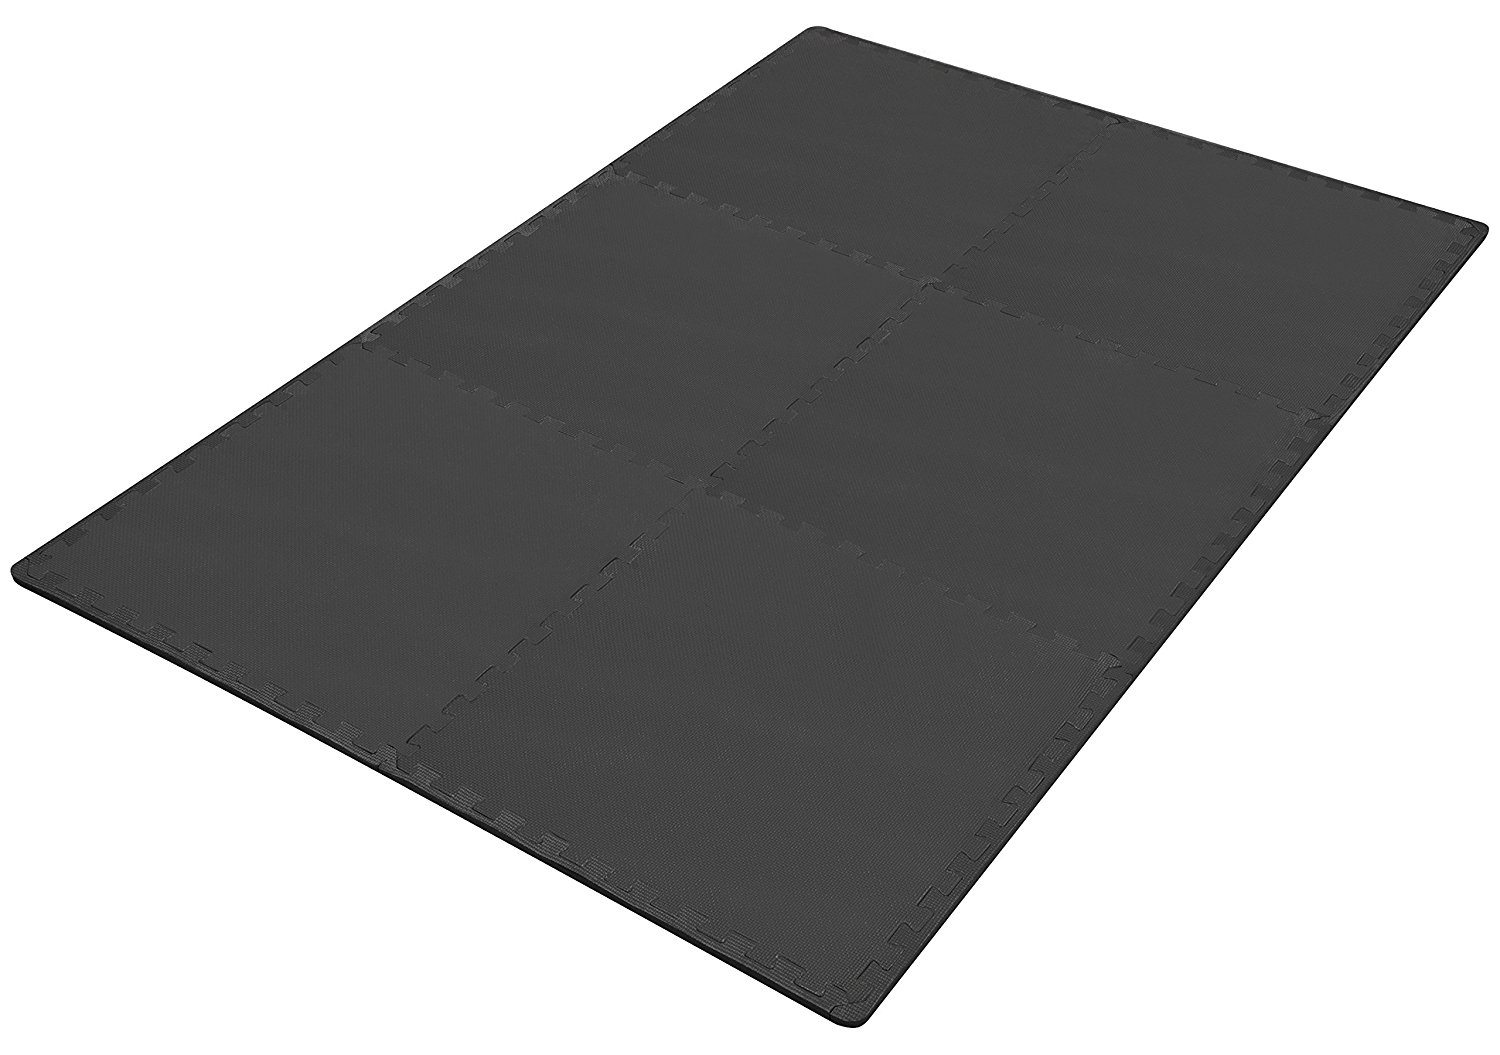 BalanceFrom 1/2 In. Thick Flooring Puzzle Exercise Mat with High Quality EVA Foam Interlocking Tiles, 6 Piece, 24 Sq Ft. Black - image 3 of 5